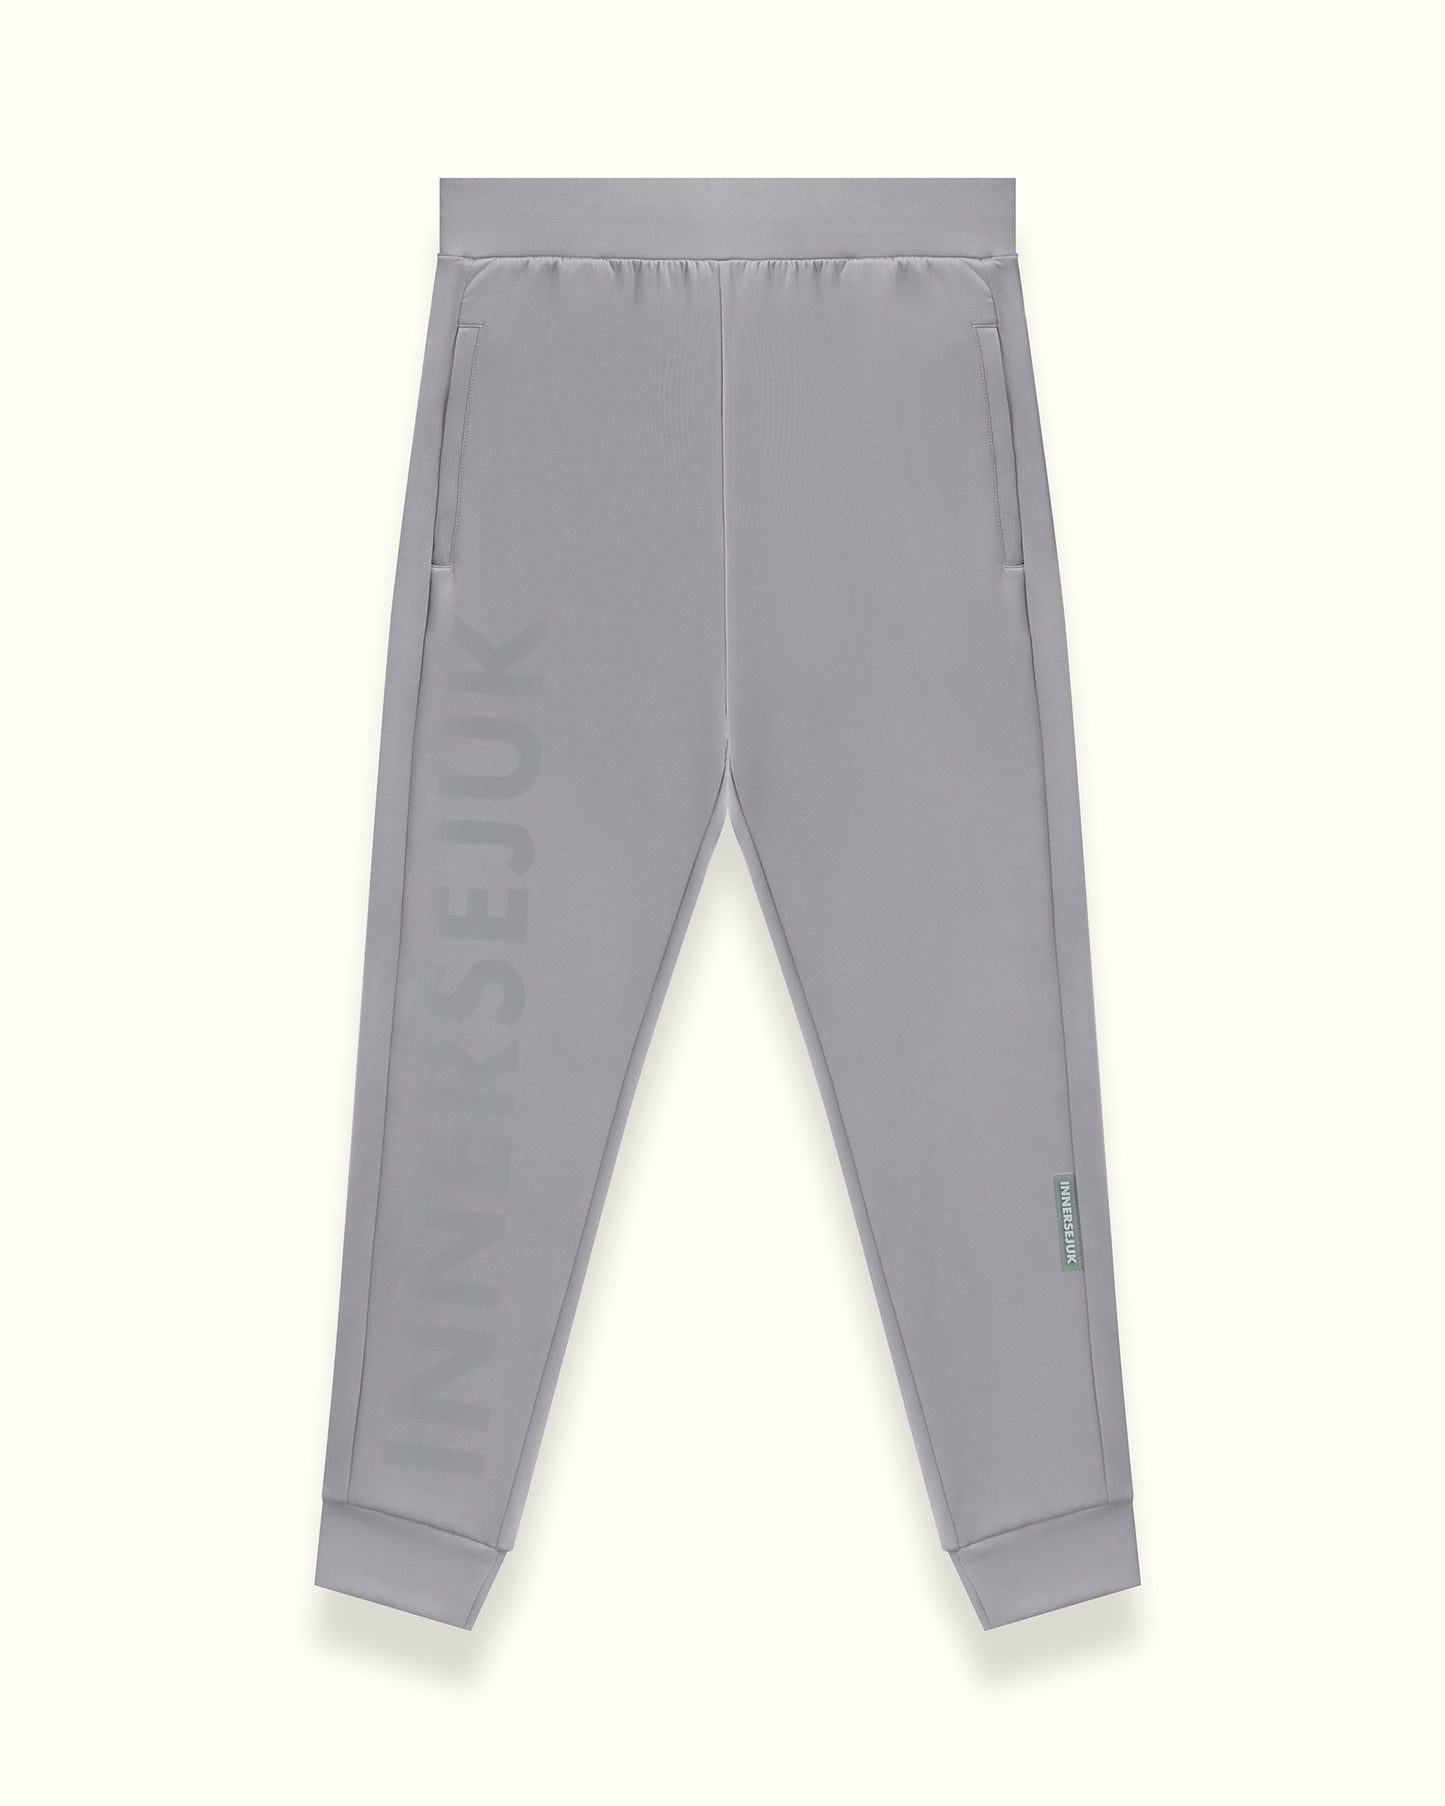 THE BOLD FITTED JOGGER IN LIGHT GREY